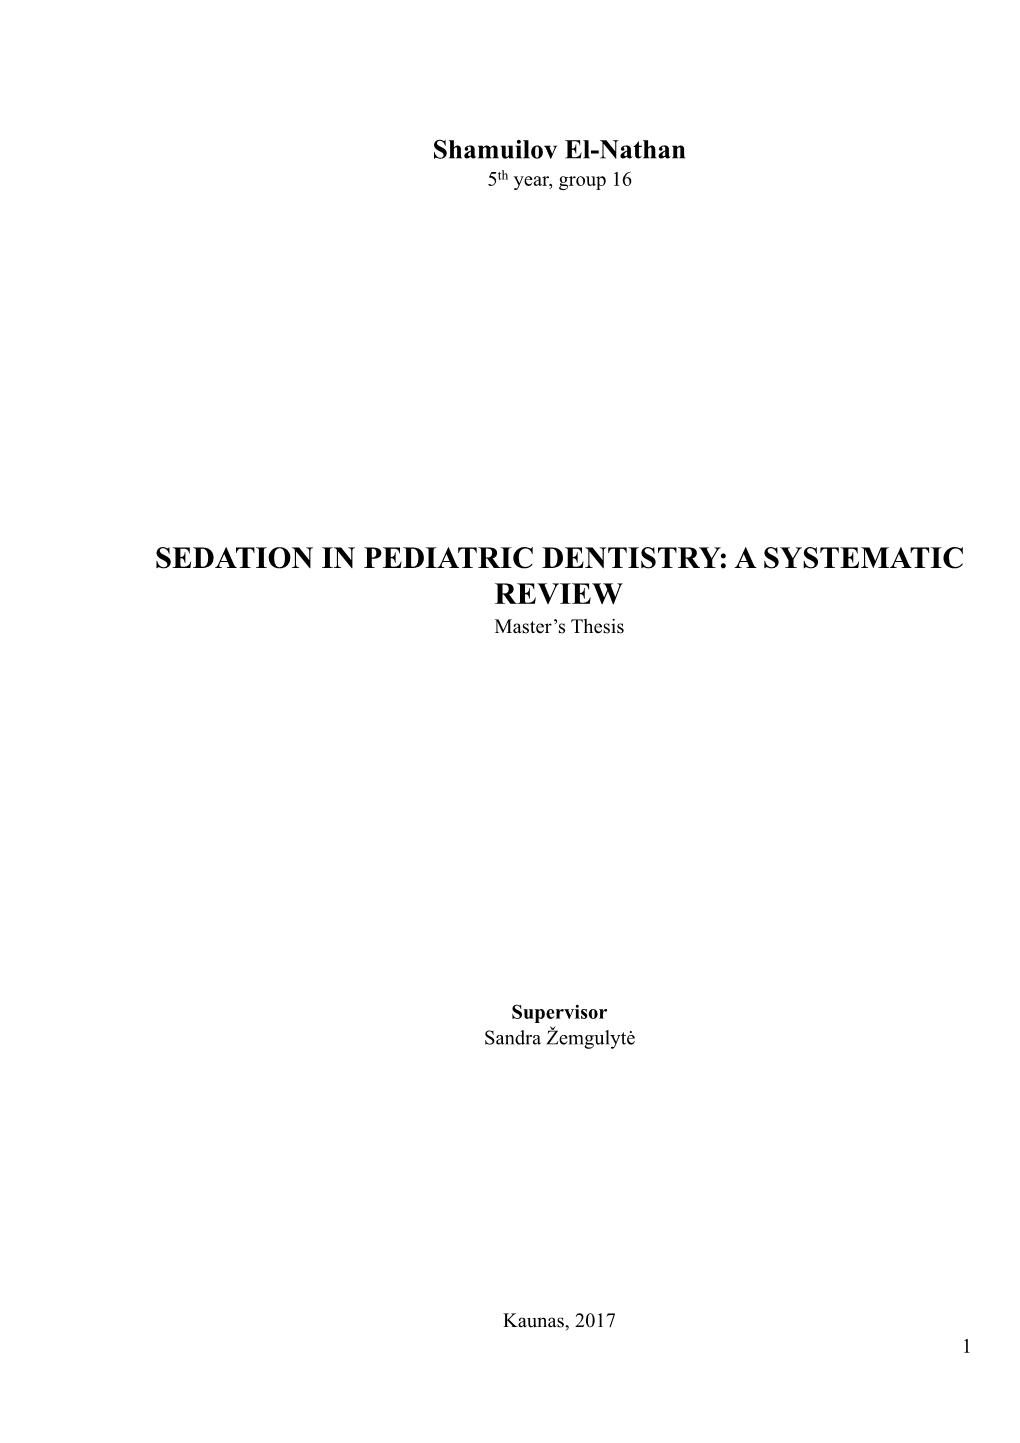 SEDATION in PEDIATRIC DENTISTRY: a SYSTEMATIC REVIEW Master’S Thesis